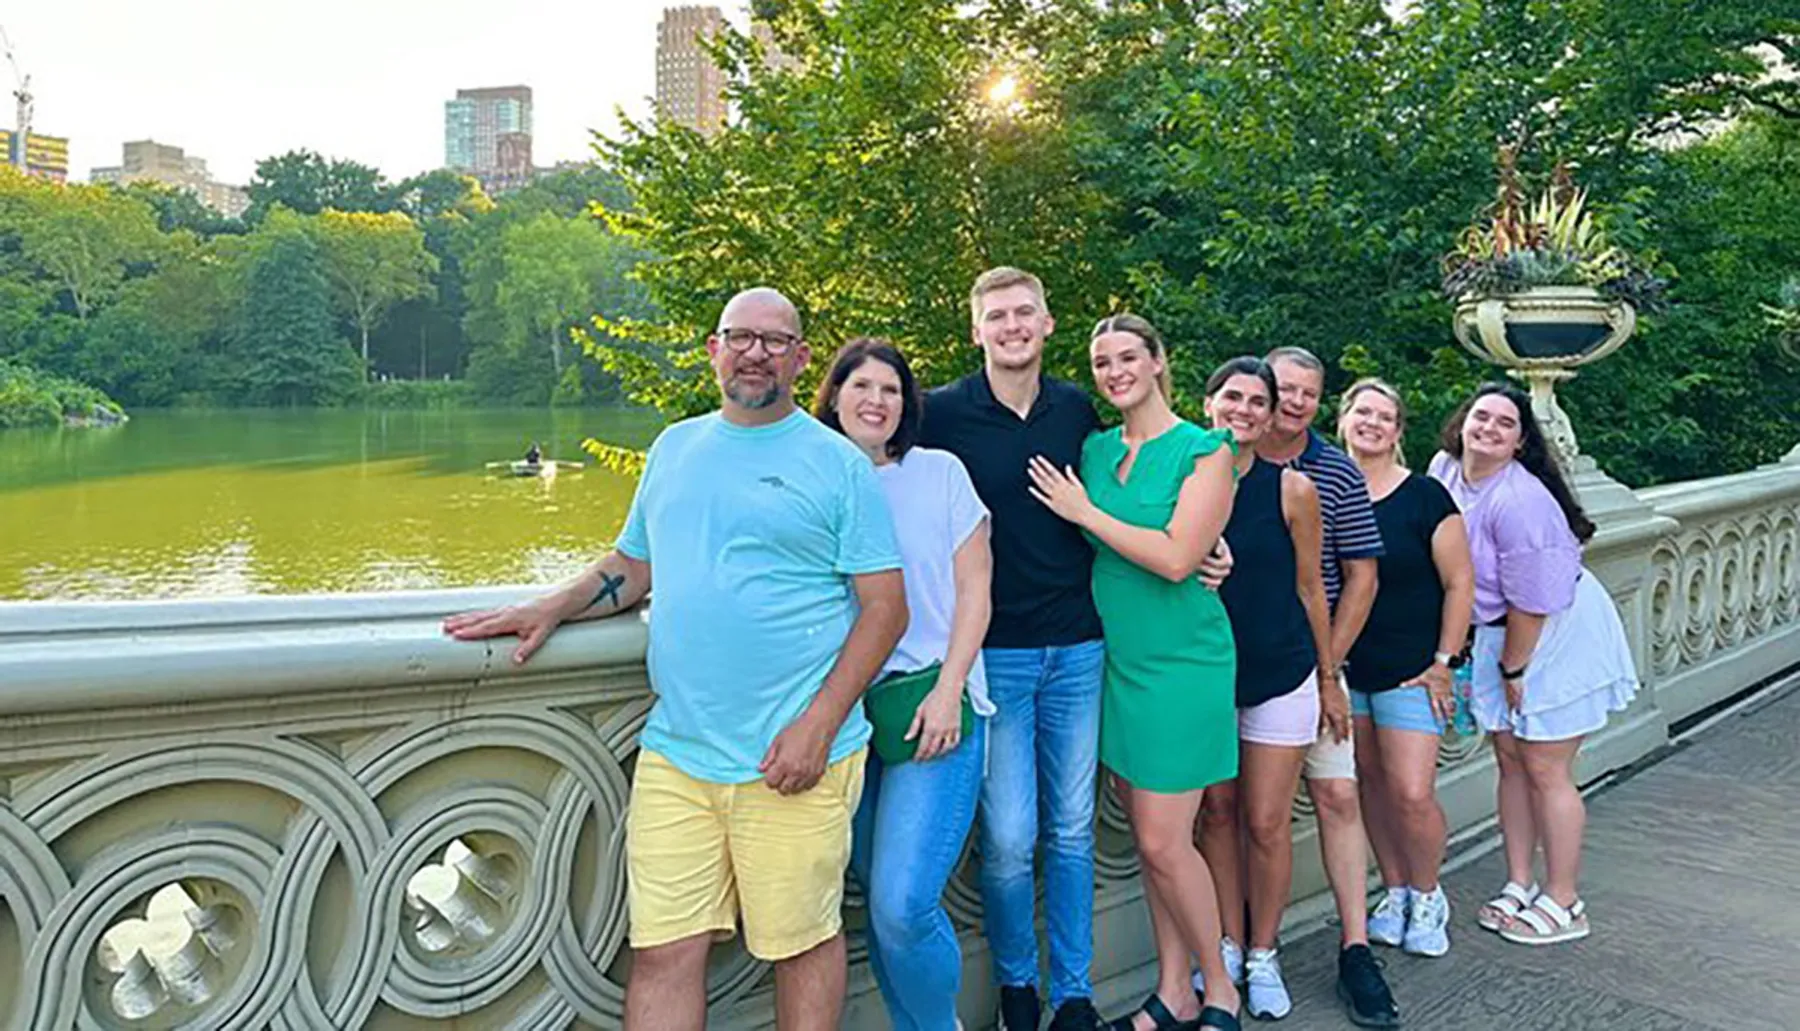 A group of eight people is posing for a smiling photo on a bridge over a pond in a lush park environment with city buildings in the background.